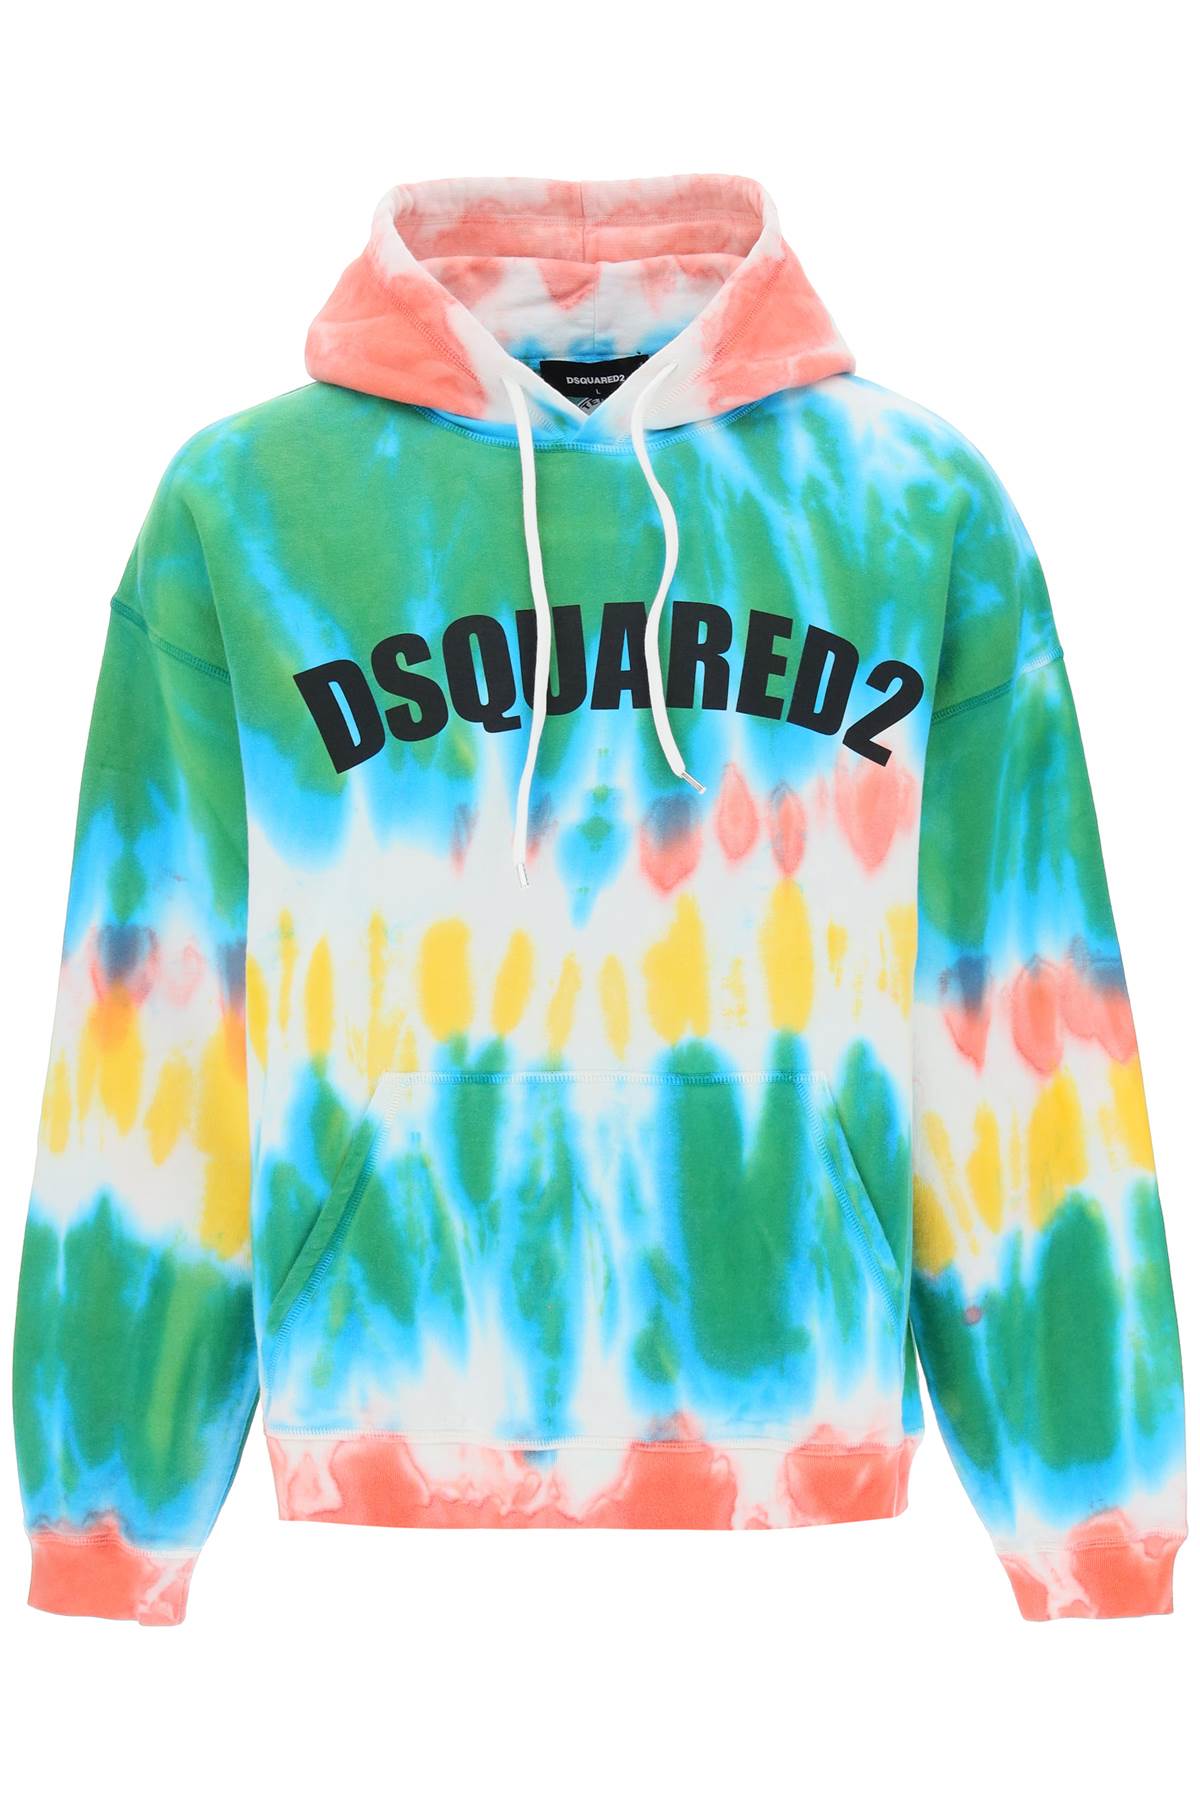 Dsquared2 Dsquared2 Men's Multicolor Other Materials Sweater - Stylemyle